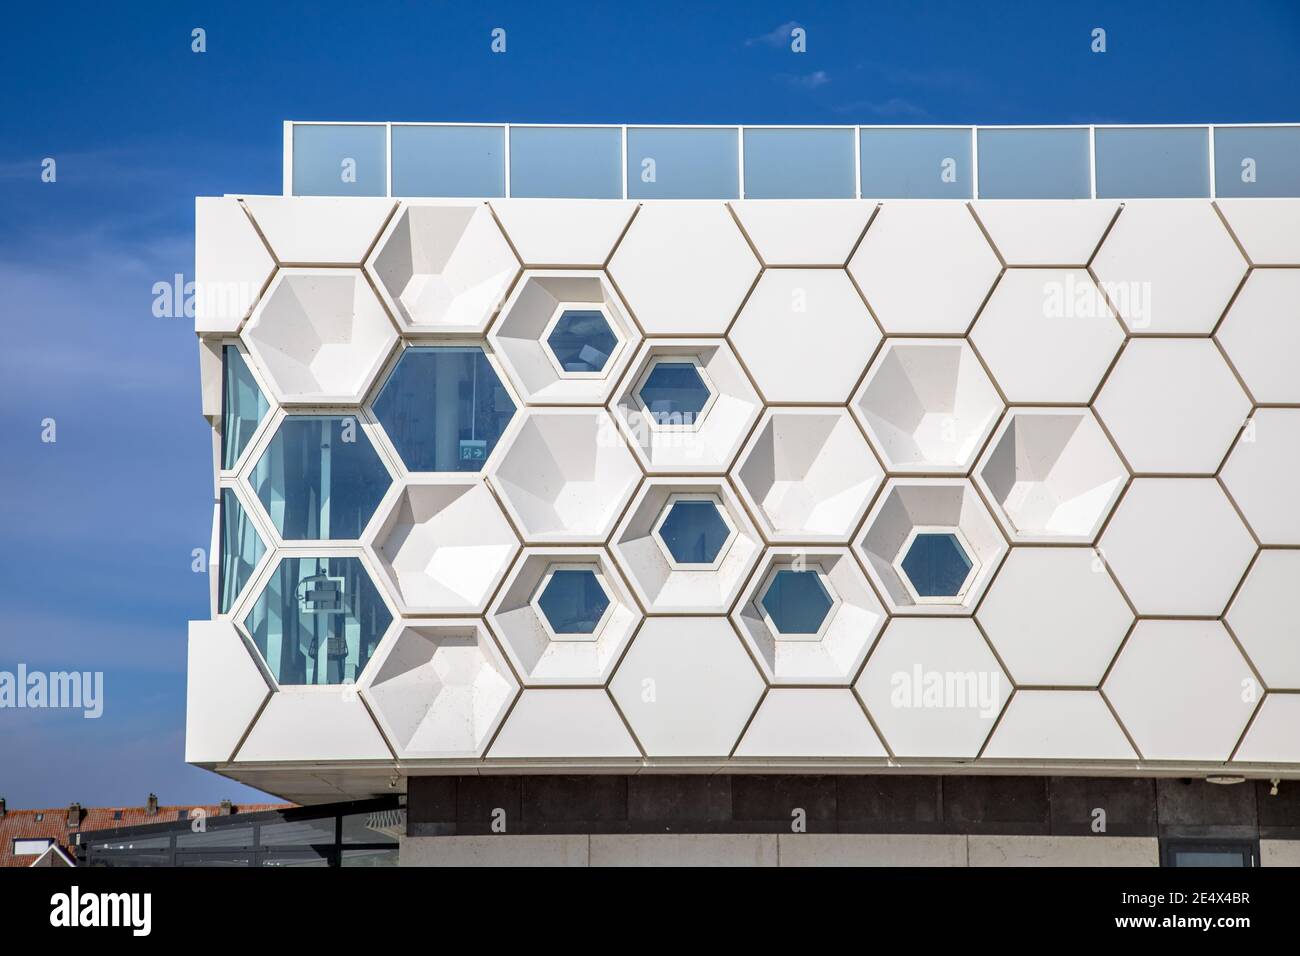 Closeup of modern facade of geometric architecture building in the Netherlands against blue sky. Stock Photo